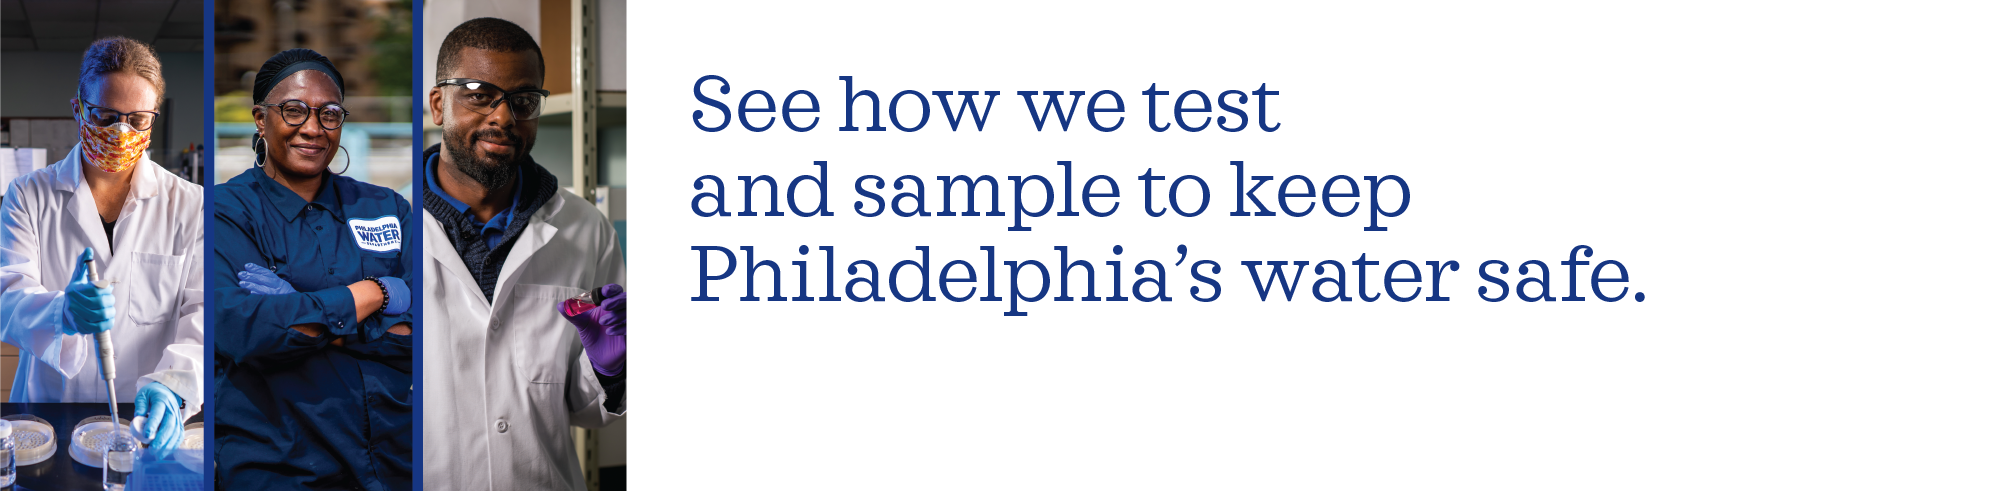 See how we test and sample to keep Philadelphia's water safe.